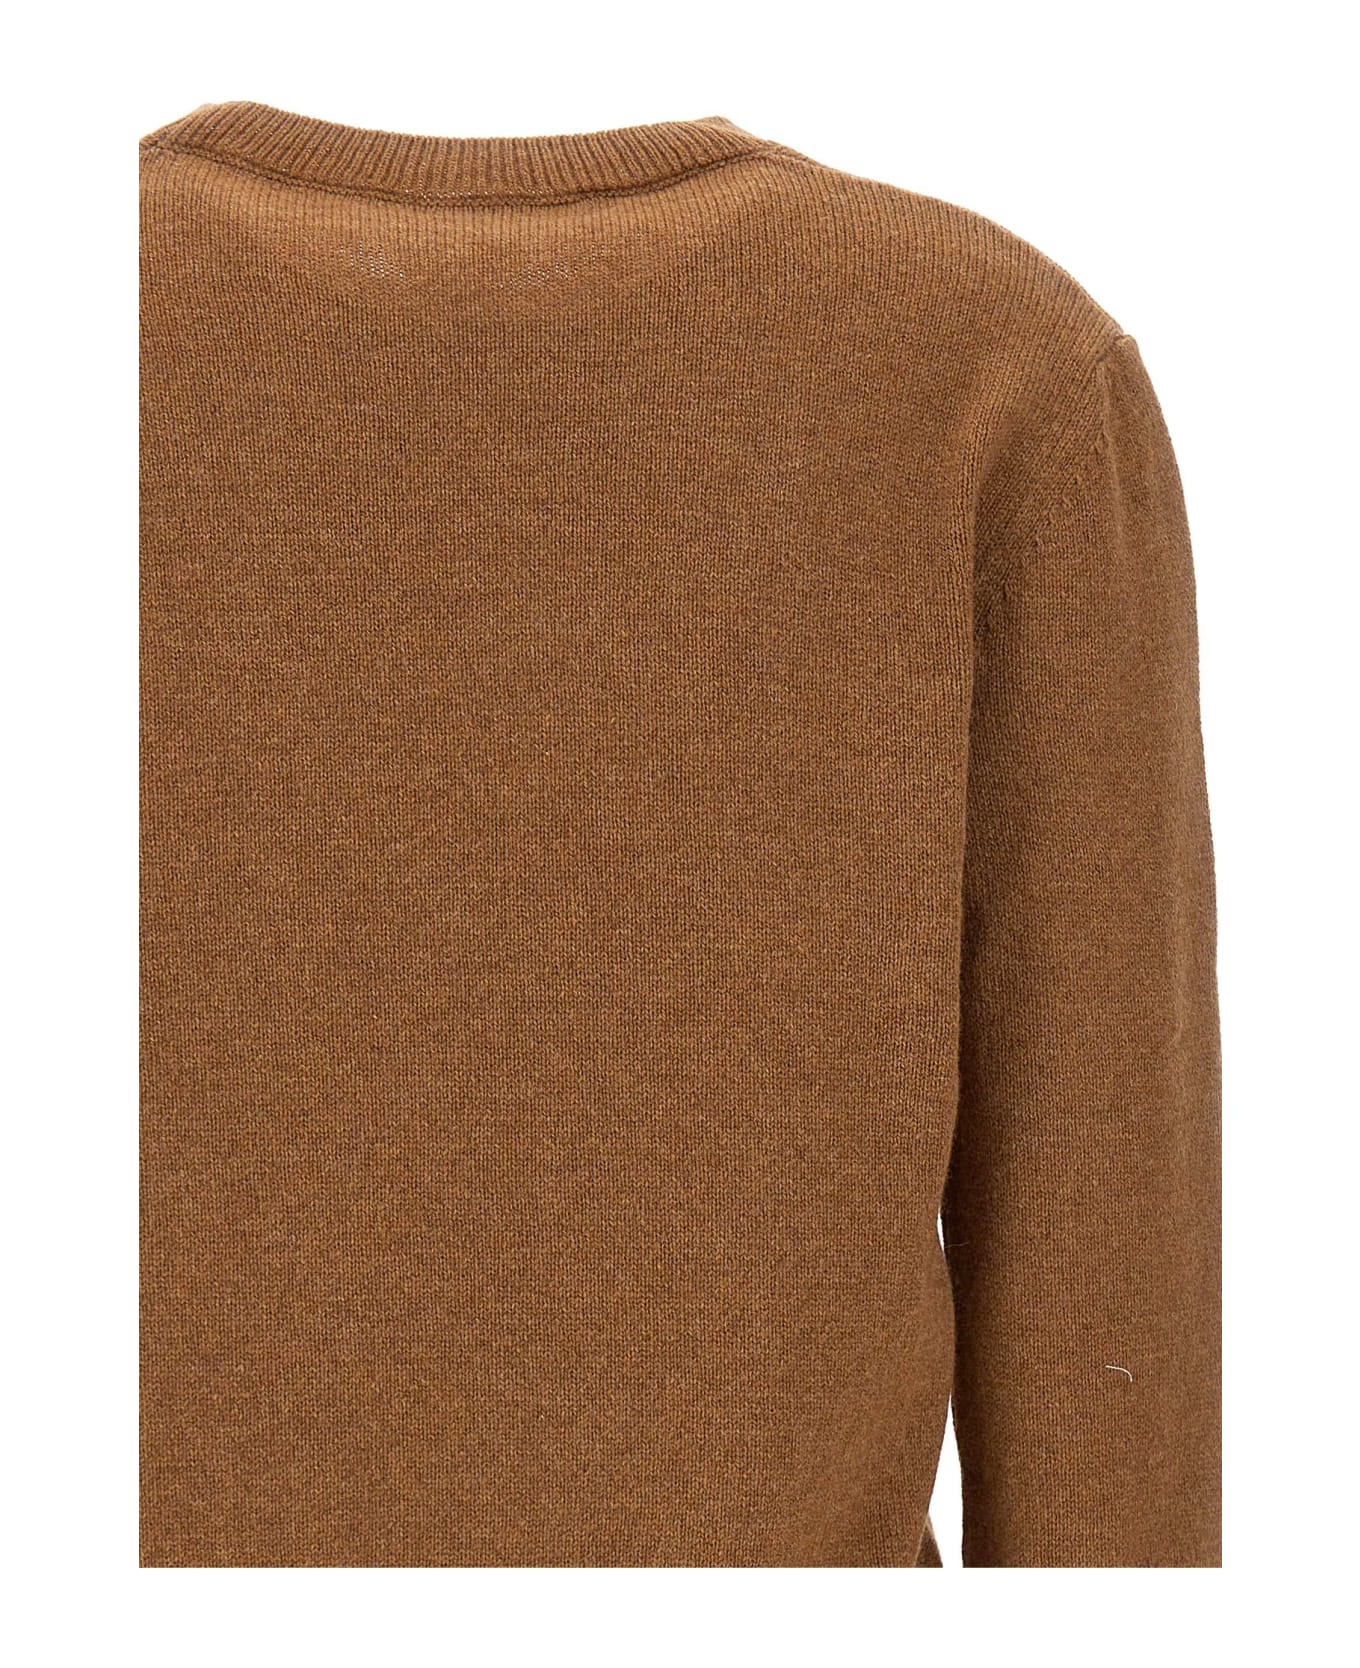 A.P.C. Merino Wool Pullover - BROWN